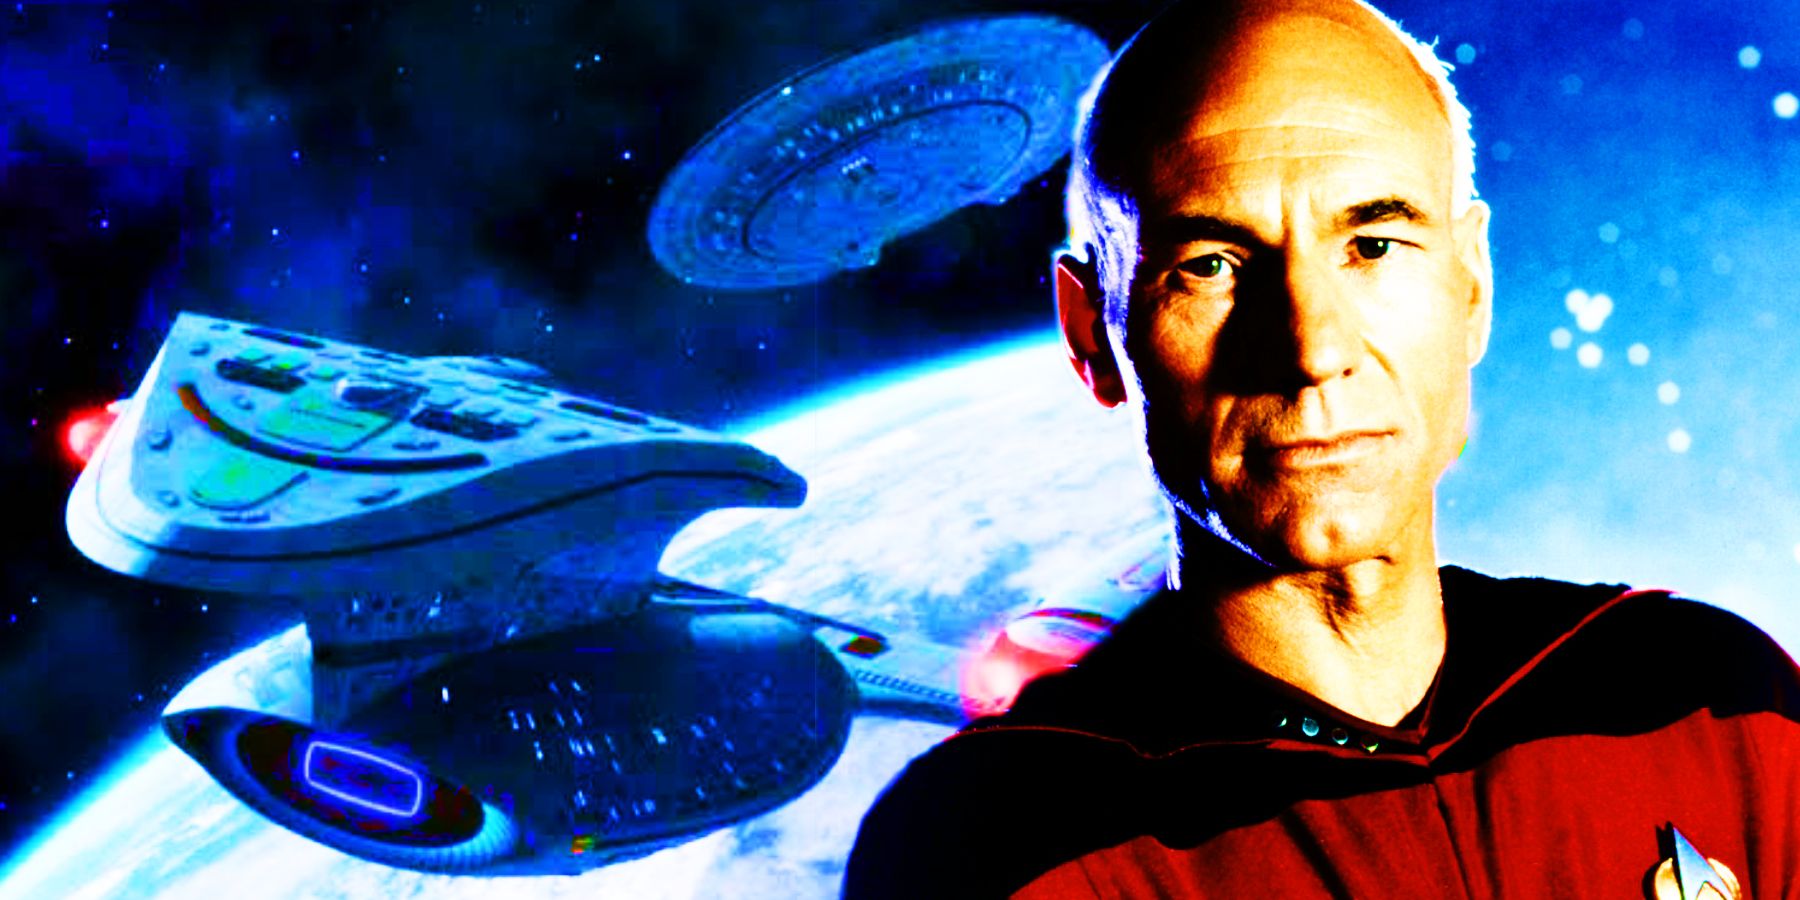 The Enterprise separating next to a picture of Captain Picard